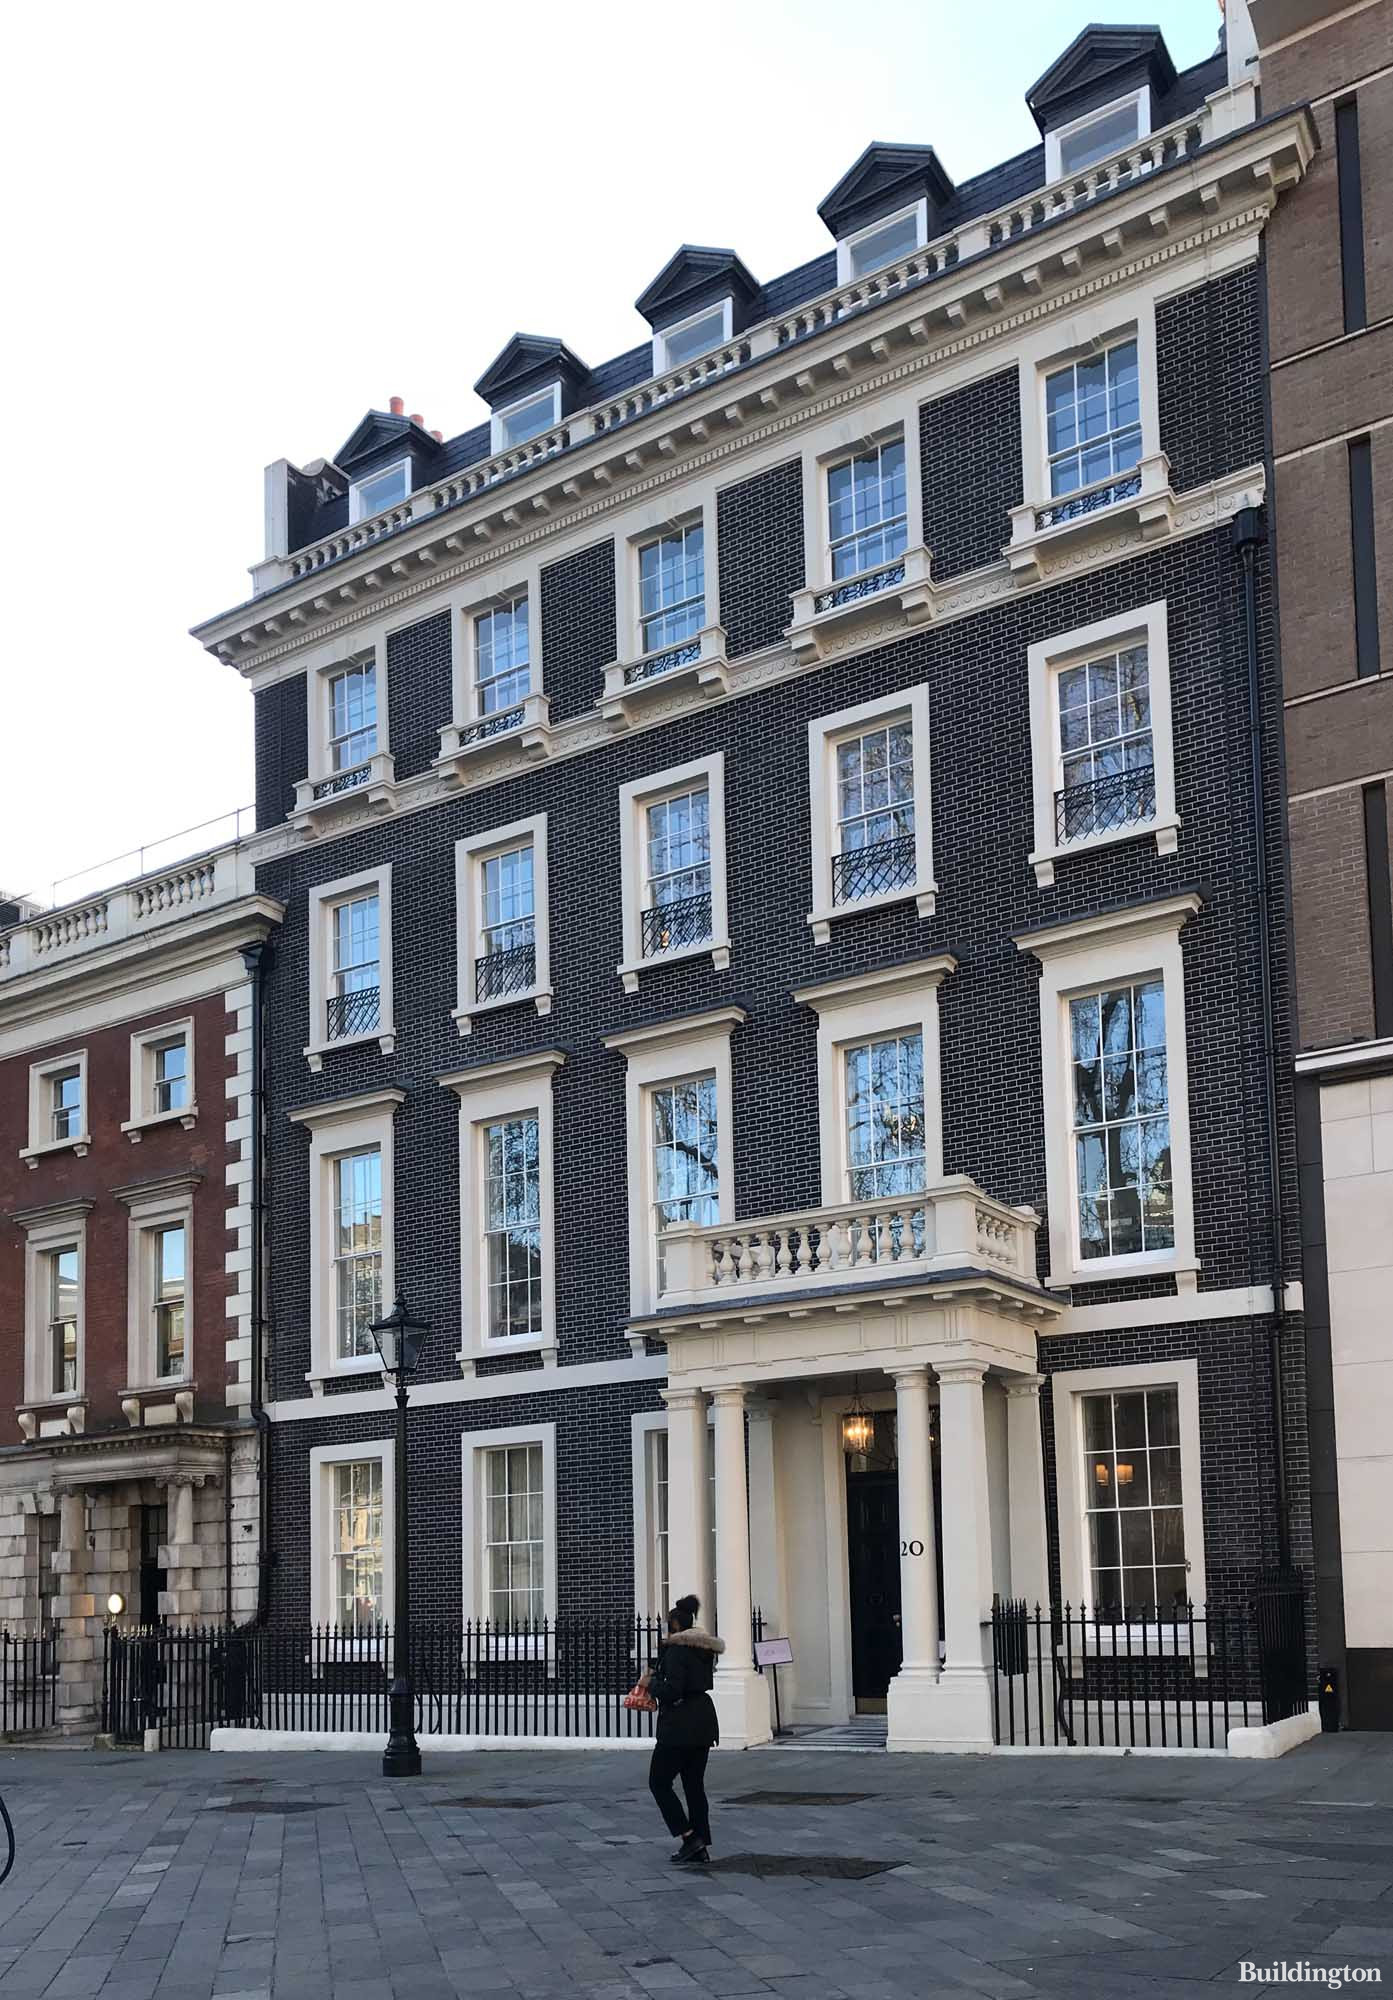 20 Hanover Square Grade II listed building in Mayfair, London W1.